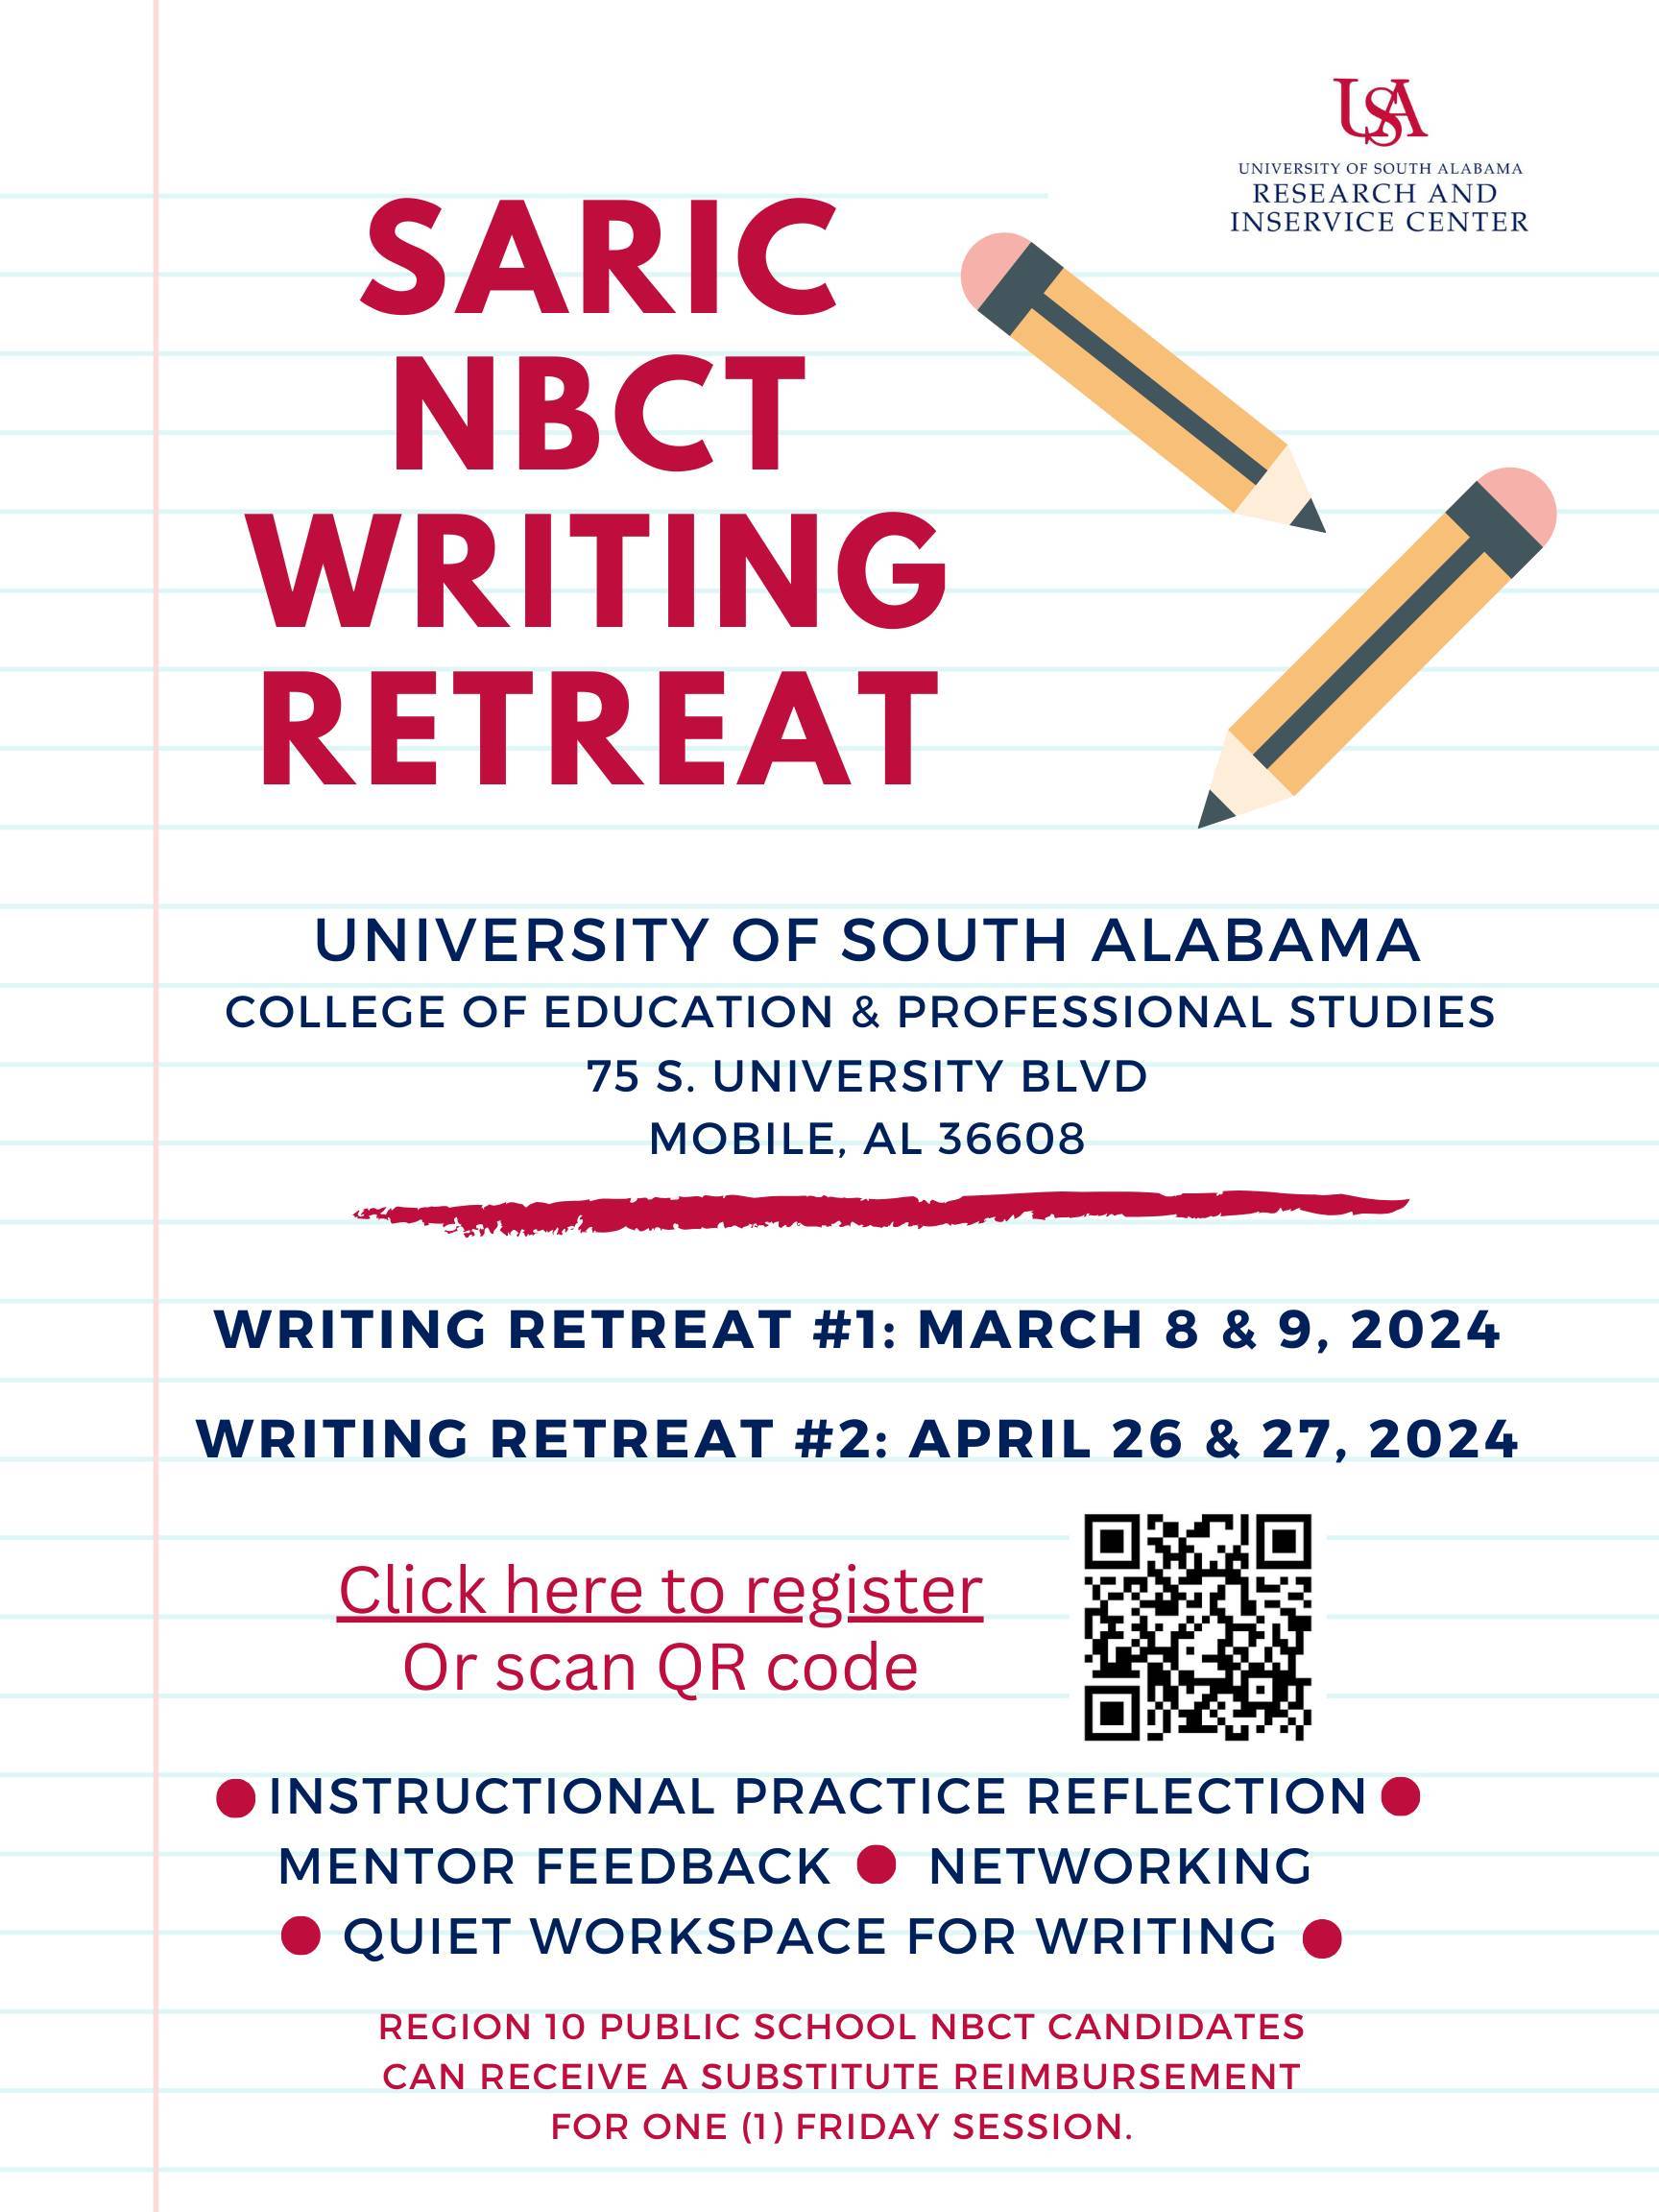 Event Name: SARIC NBCT Writing Retreat						Location: University of South Alabama College of Education and Professional Studies 75 S University Blvd., Mobile, AL 36608												Writing Retreat #1: March 8-9						Writing Retreat #2: April 26-27												Services offered: instructional practice reflection, mentor feedback, networking, quite writing workspace												Region 10 Public School NBCT candidates can receive a substitute reimbursement for one (1) Friday session. data-lightbox='featured'